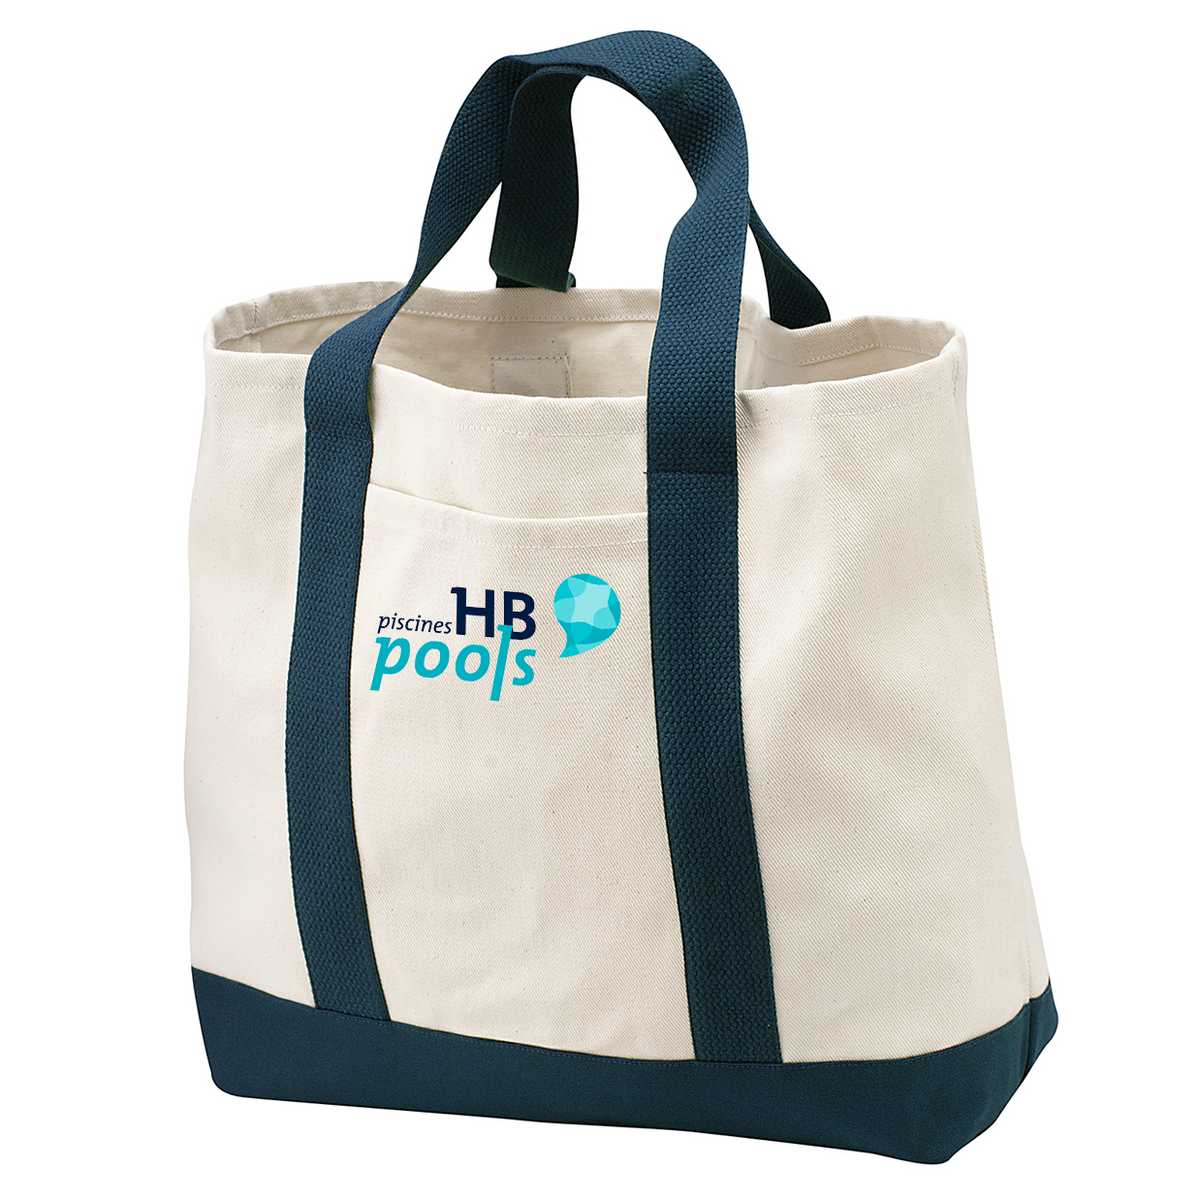 HB Pools Two Tone Shopping Tote